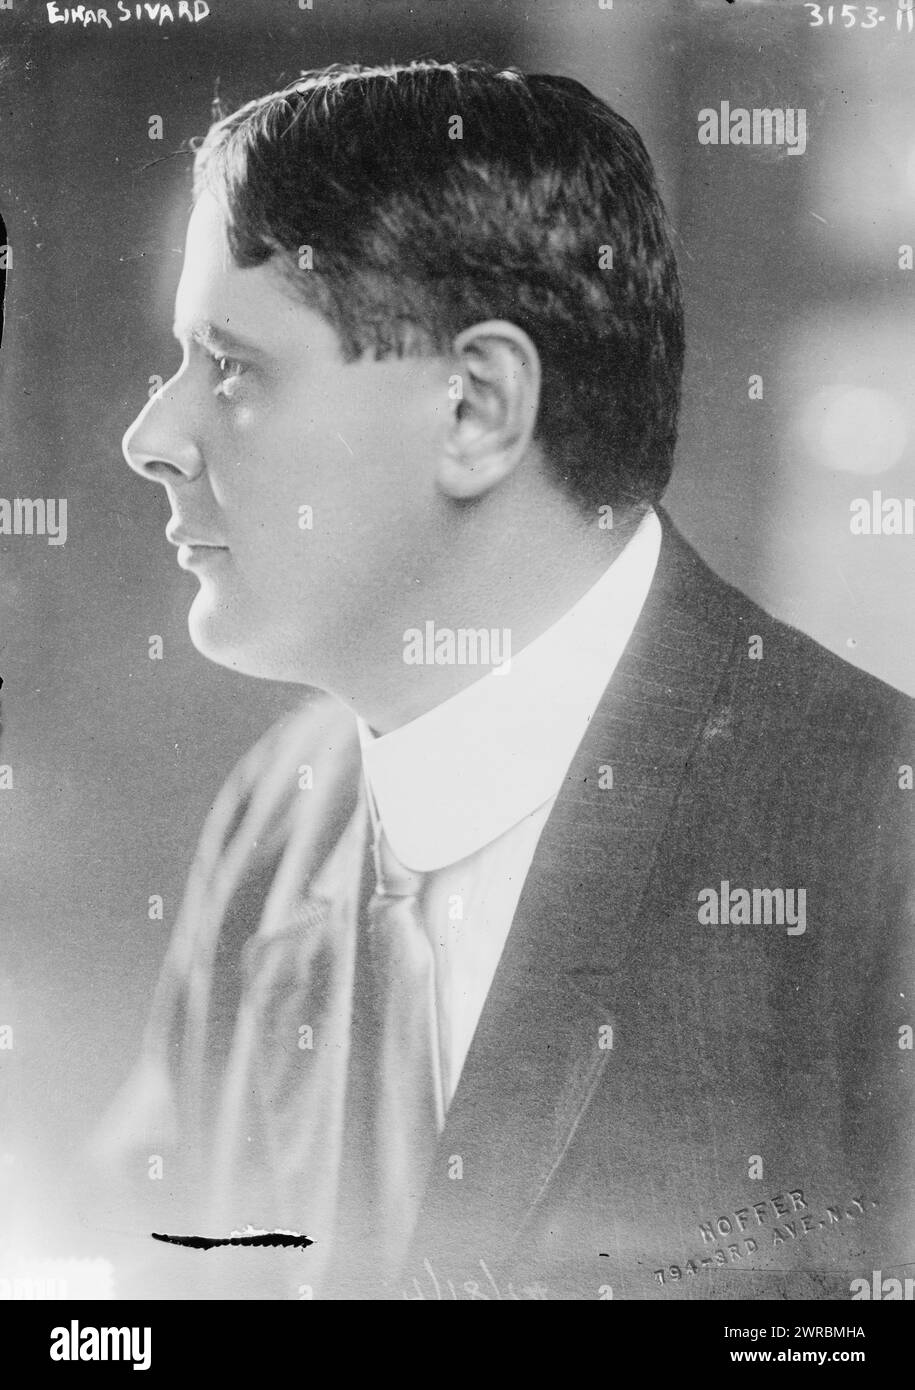 Einar Sivard, Photograph shows Einar Sivard, Superintendent of the Welin Manufacturing Co. which built the Lundin lifeboats. In July 1914 he started on a voyage in a Lundin Power Lifeboat with his wife, Signe Holm Sivard, 1914 April 18, Glass negatives, 1 negative: glass Stock Photo